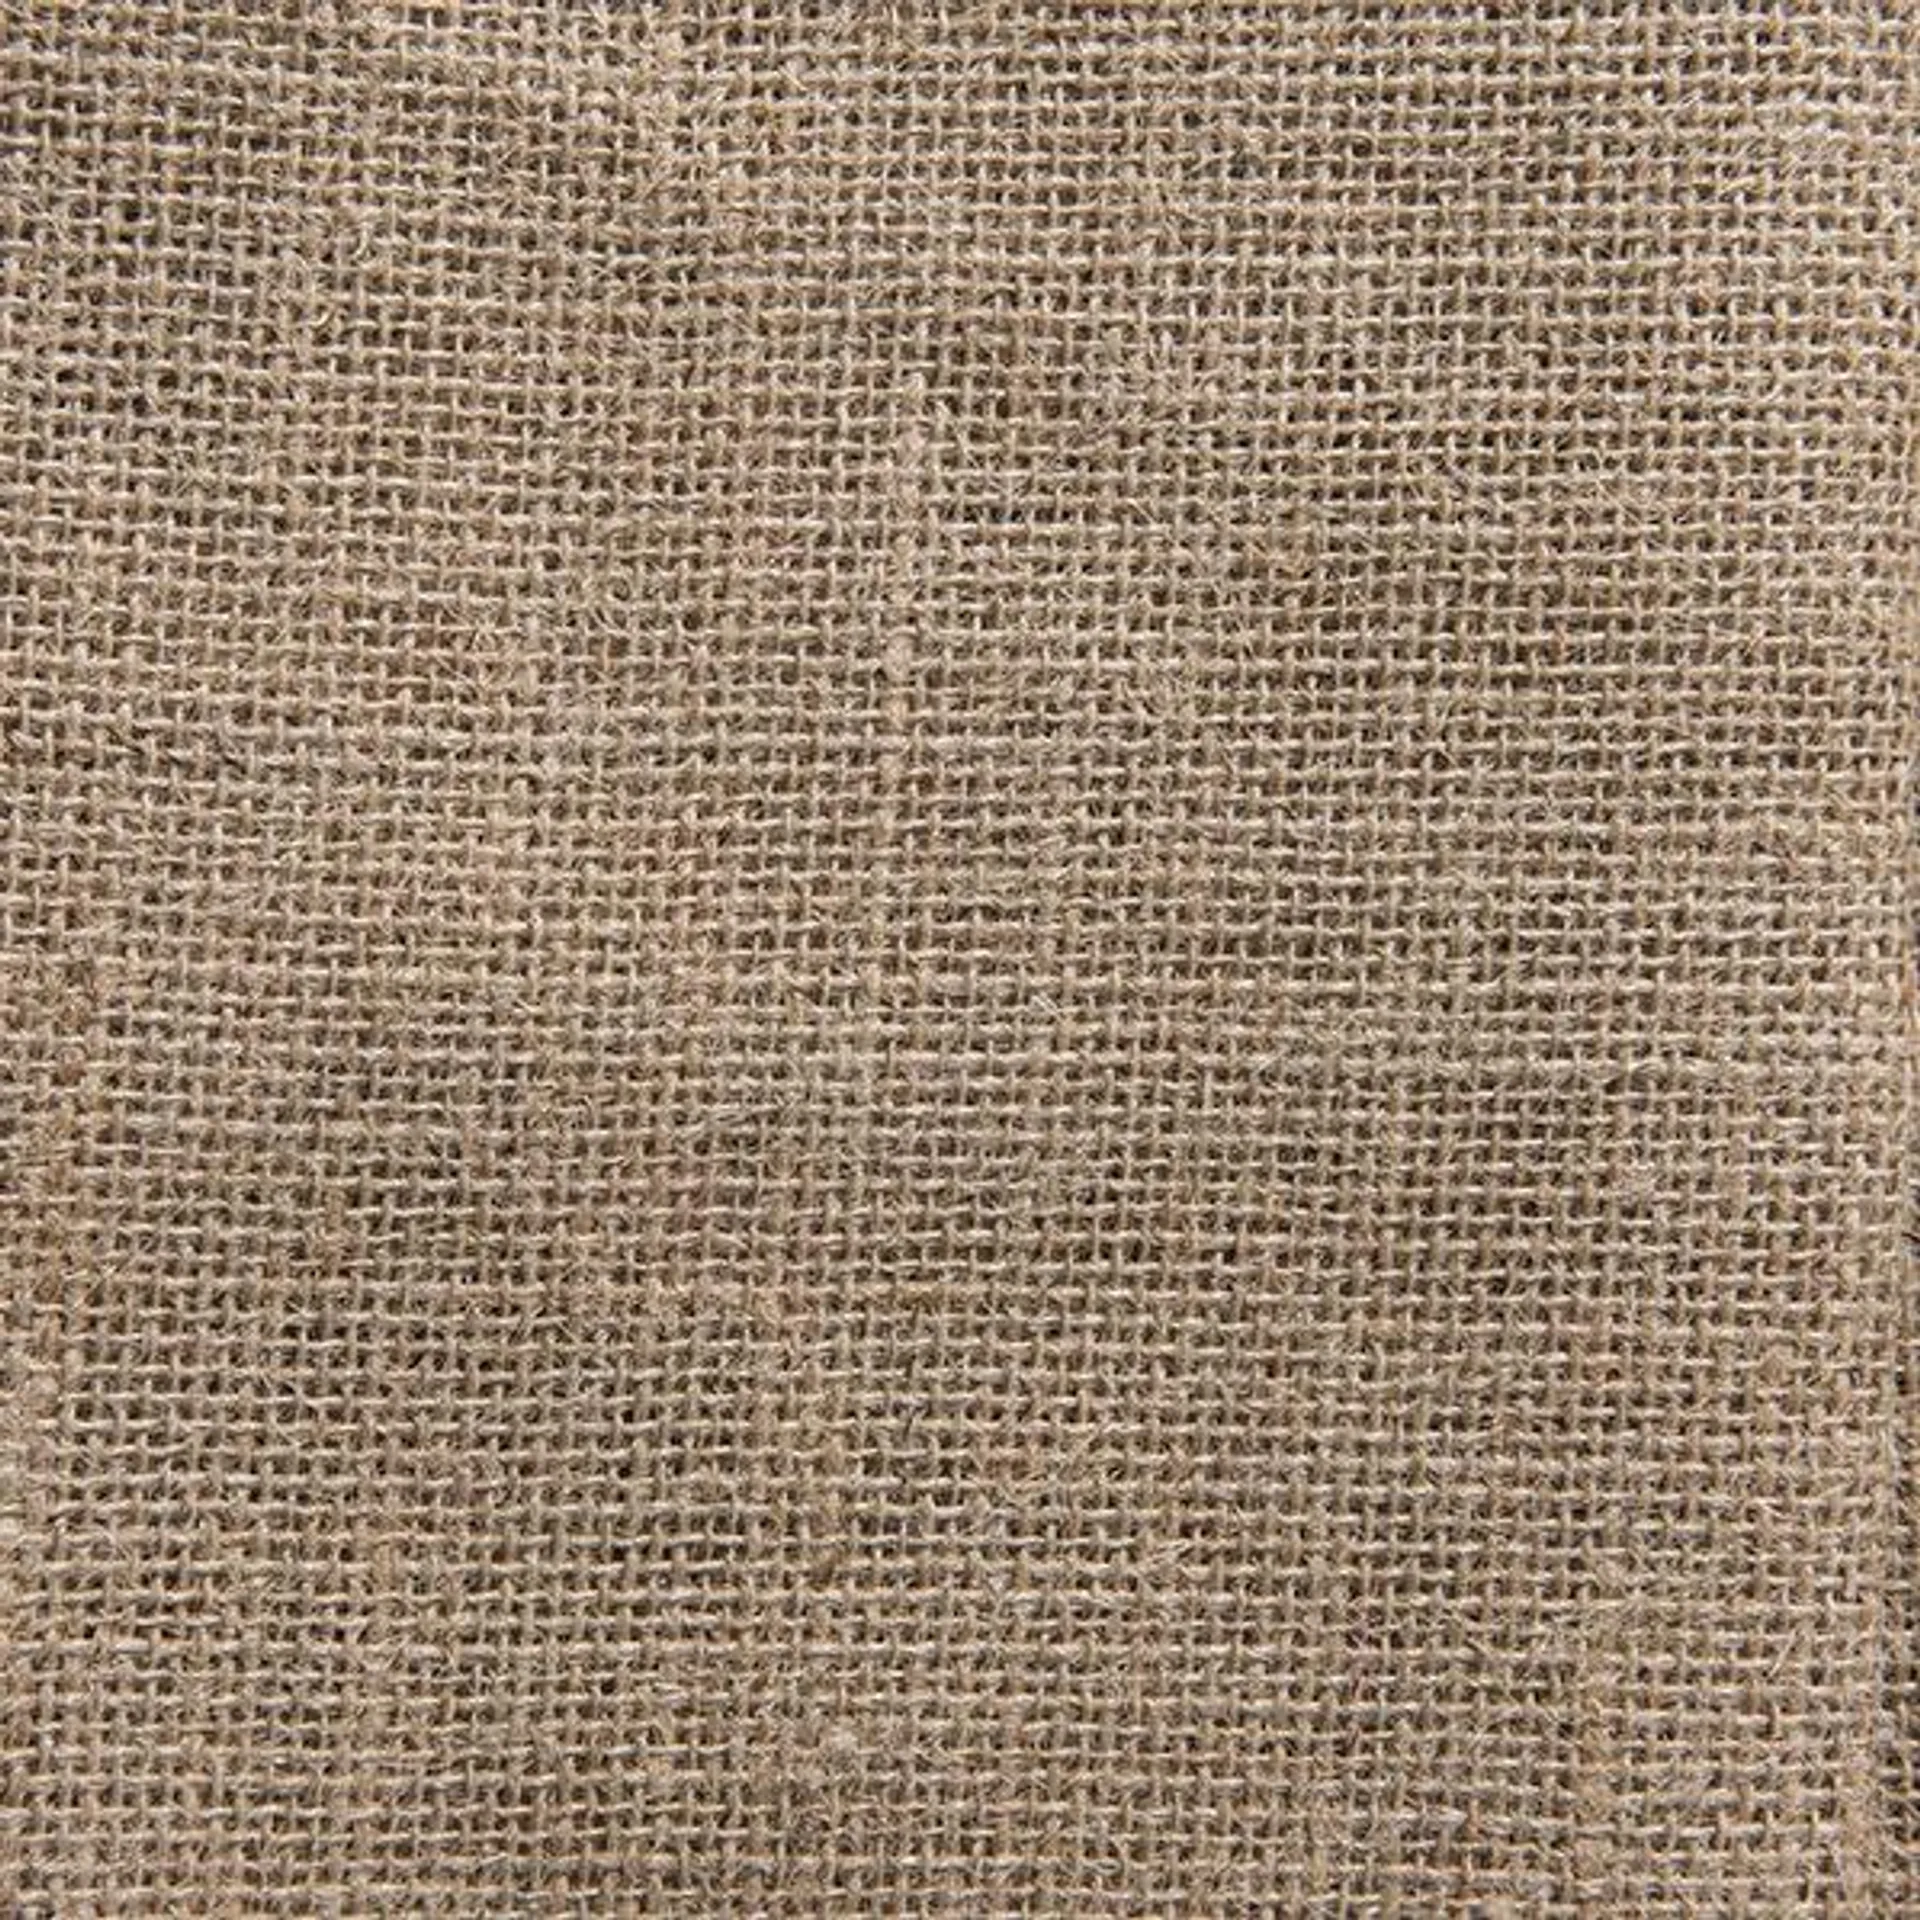 Hessian Fabric, Undyed Natural - Width 120cm